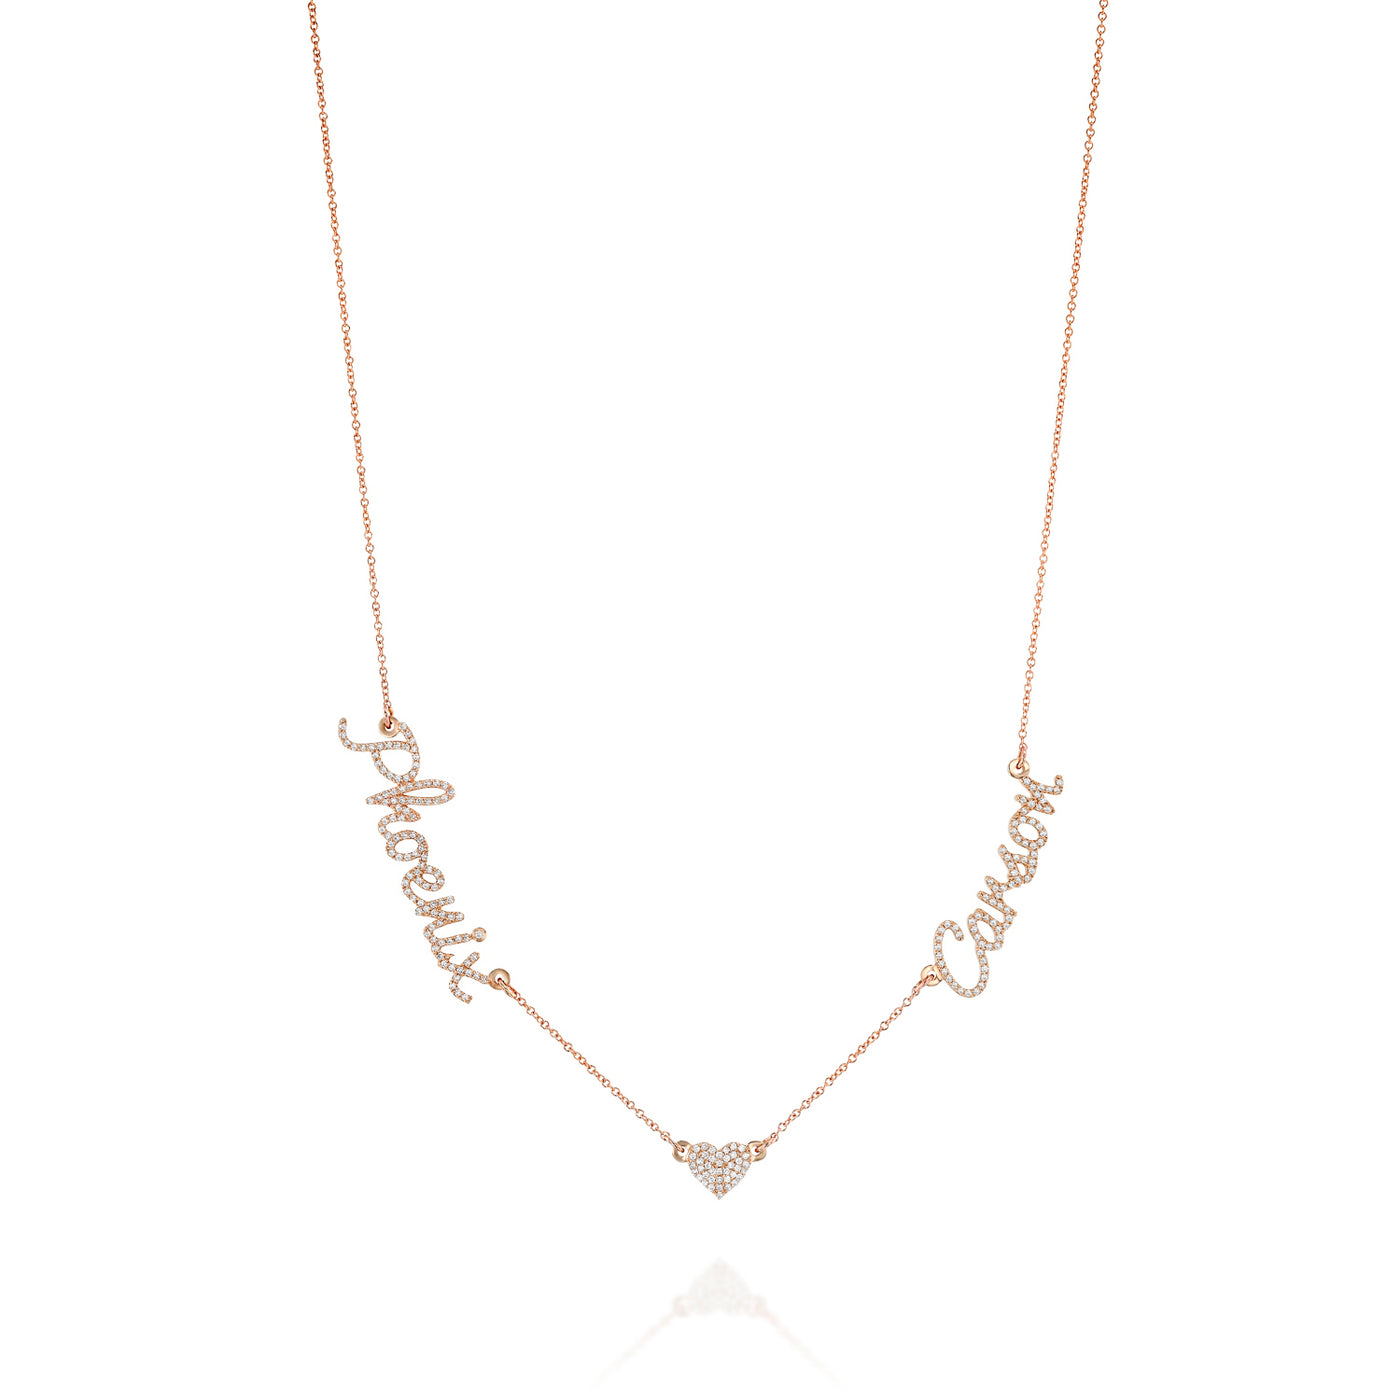 Double Name Necklace With a Diamond Heart – Rimon Fine Jewelry